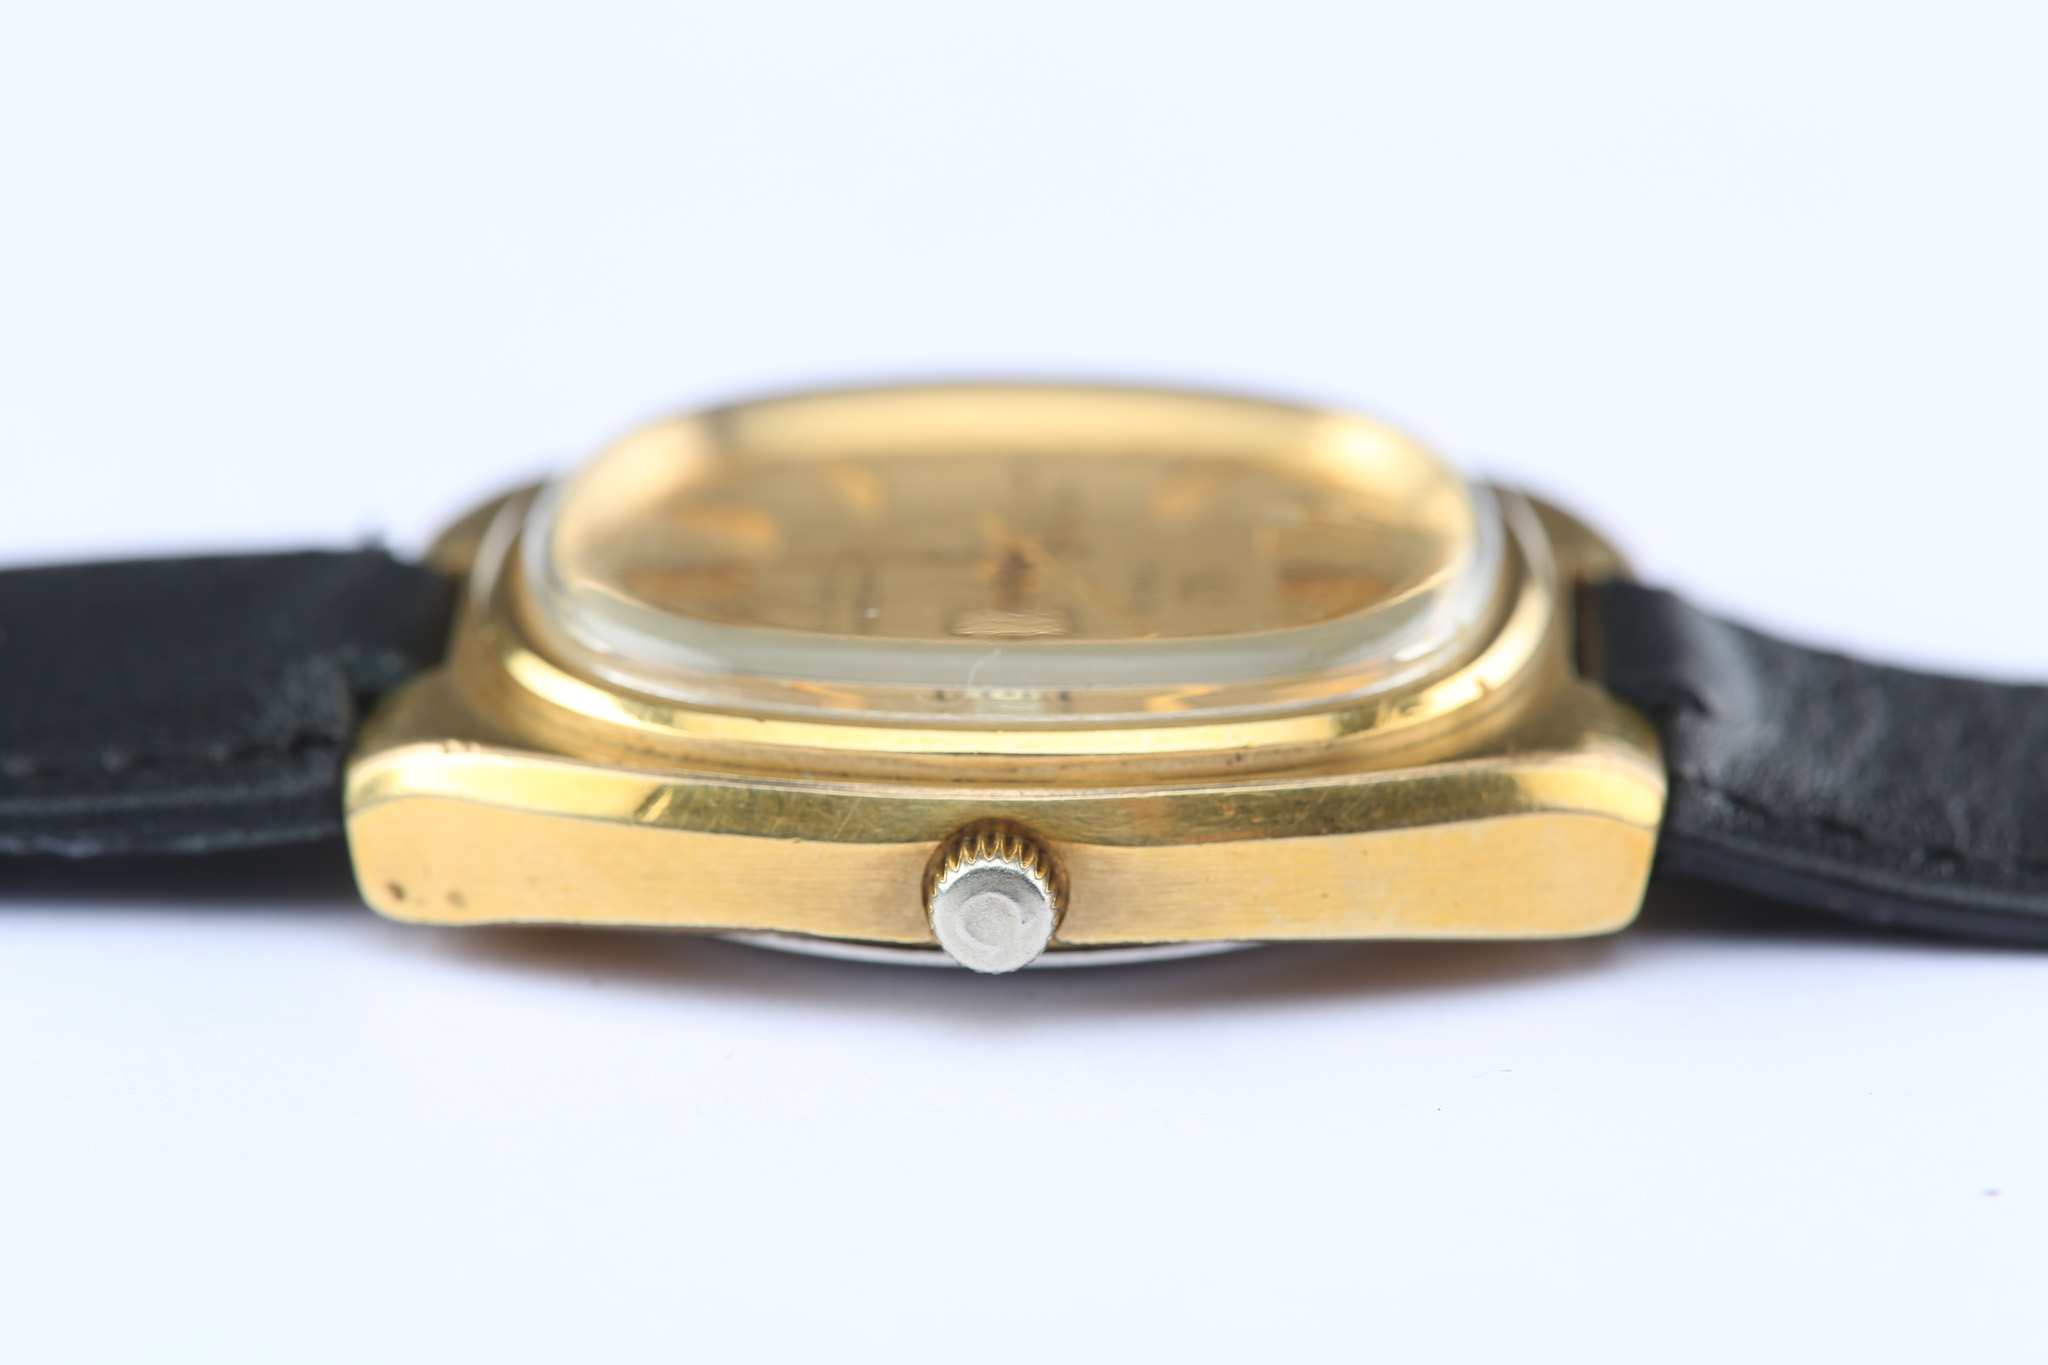 Omega. A gold capped automatic calendar wristwatch. Model: Seamaster. Reference: 166.0213 / 366. - Image 4 of 6